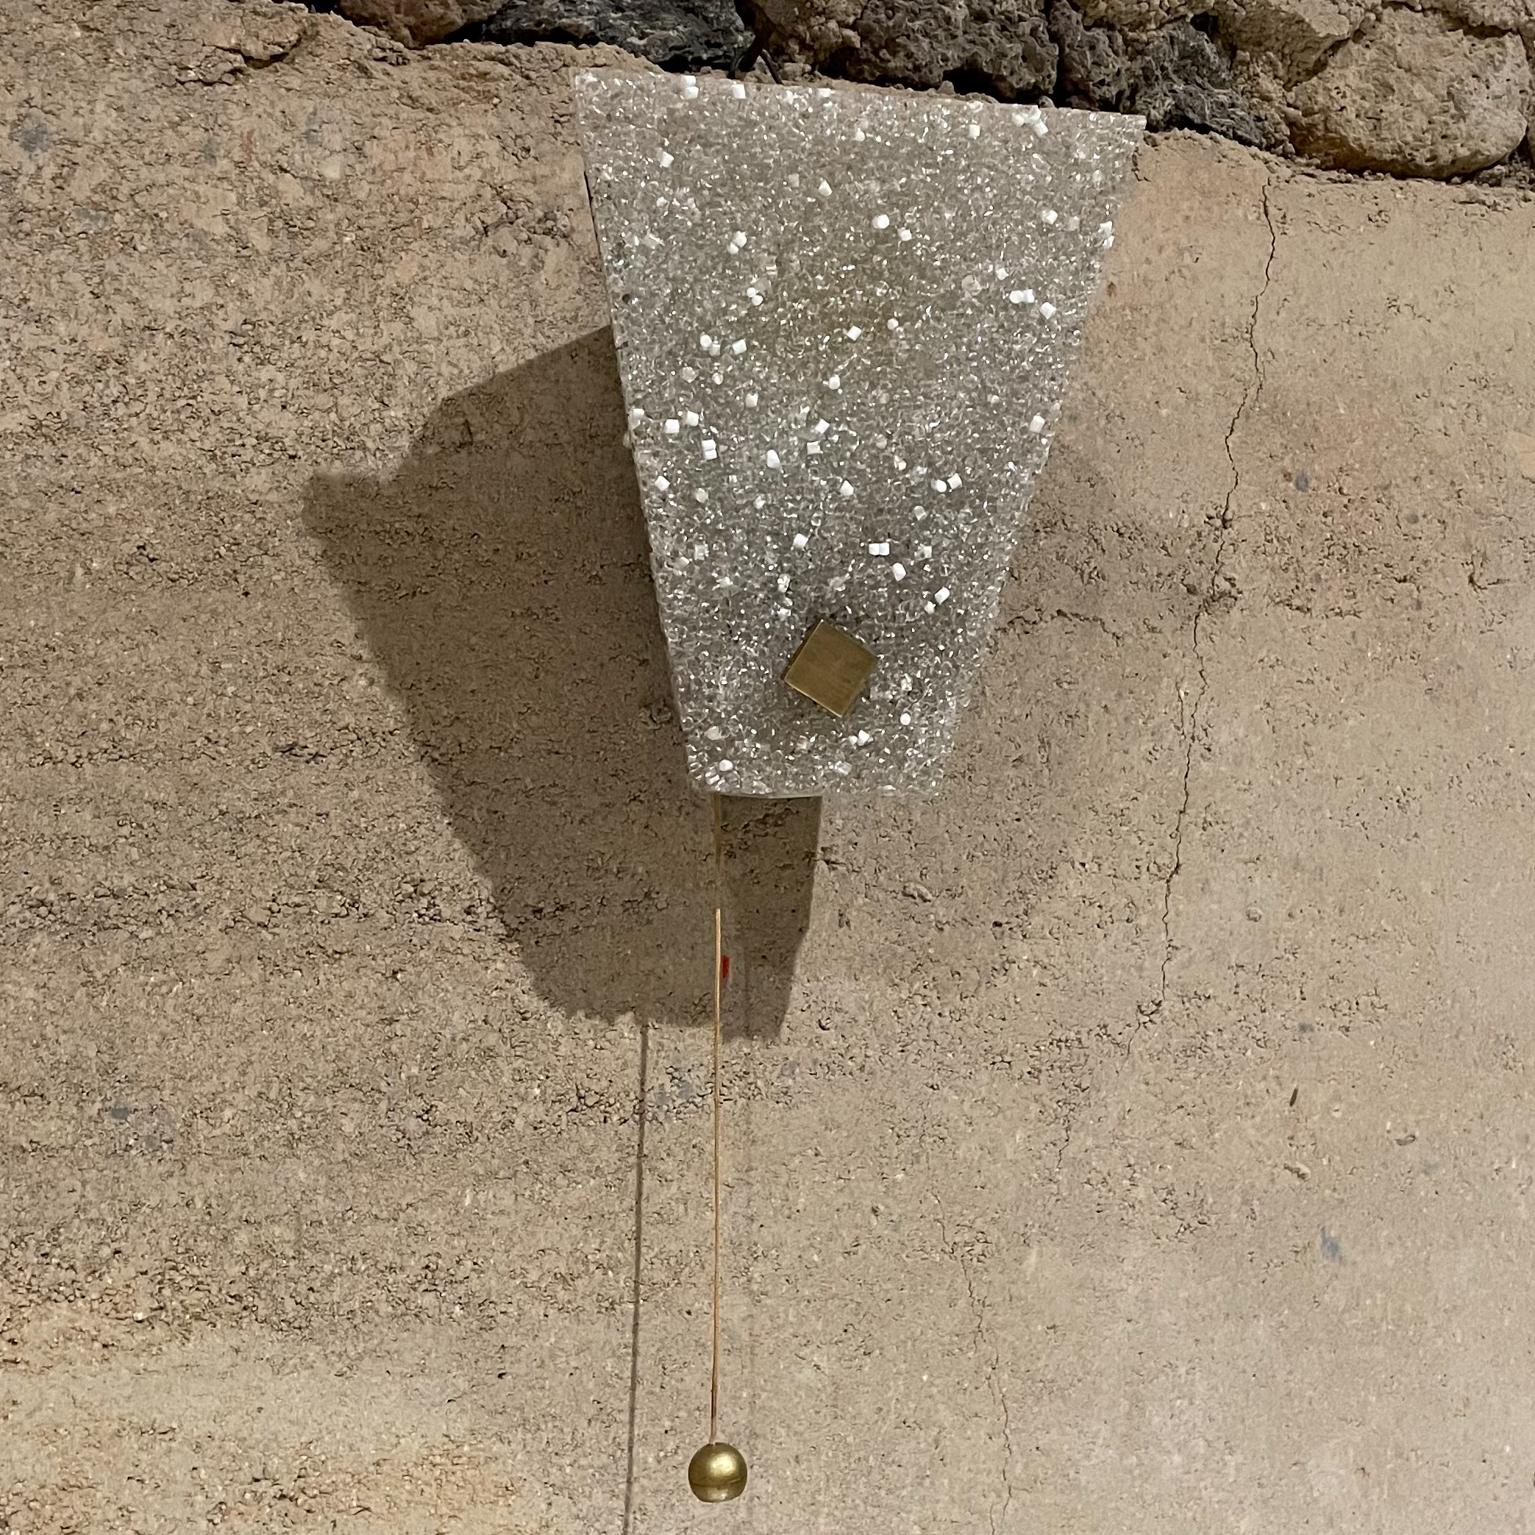 Corner wall lamp
Exquisite French style Arlus rare 90-degree corner wall sconce in textured plexiglass with brass hardware.
Metal aluminum frame painted in black & white.
No label, attributed to ARLUS 1960s France
Measures: 7.13 tall x 6 width x